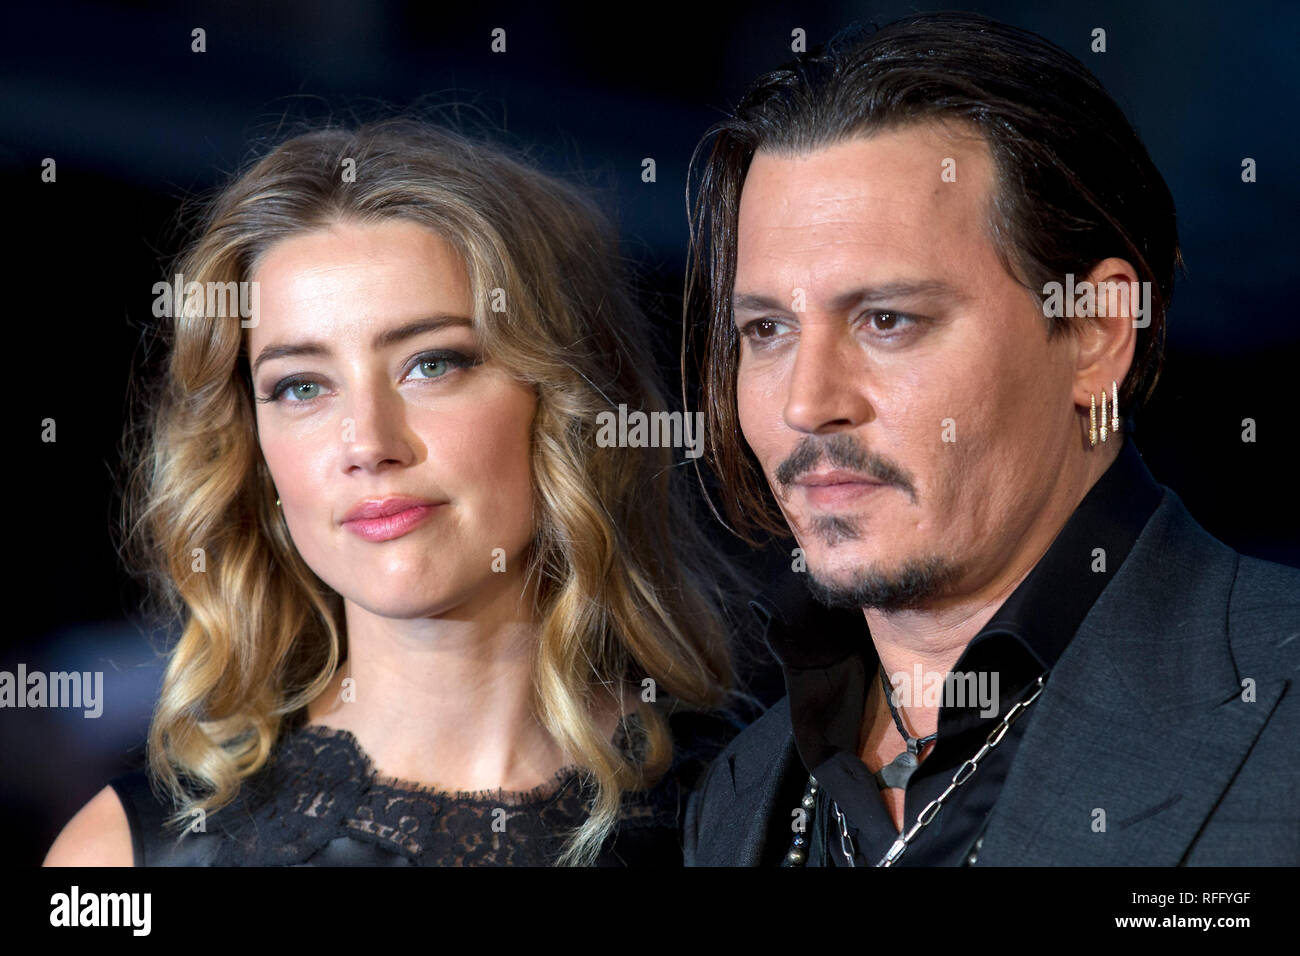 Johnny Depp & Amber Heard pose at premiere in London. October, 2015. Stock Photo